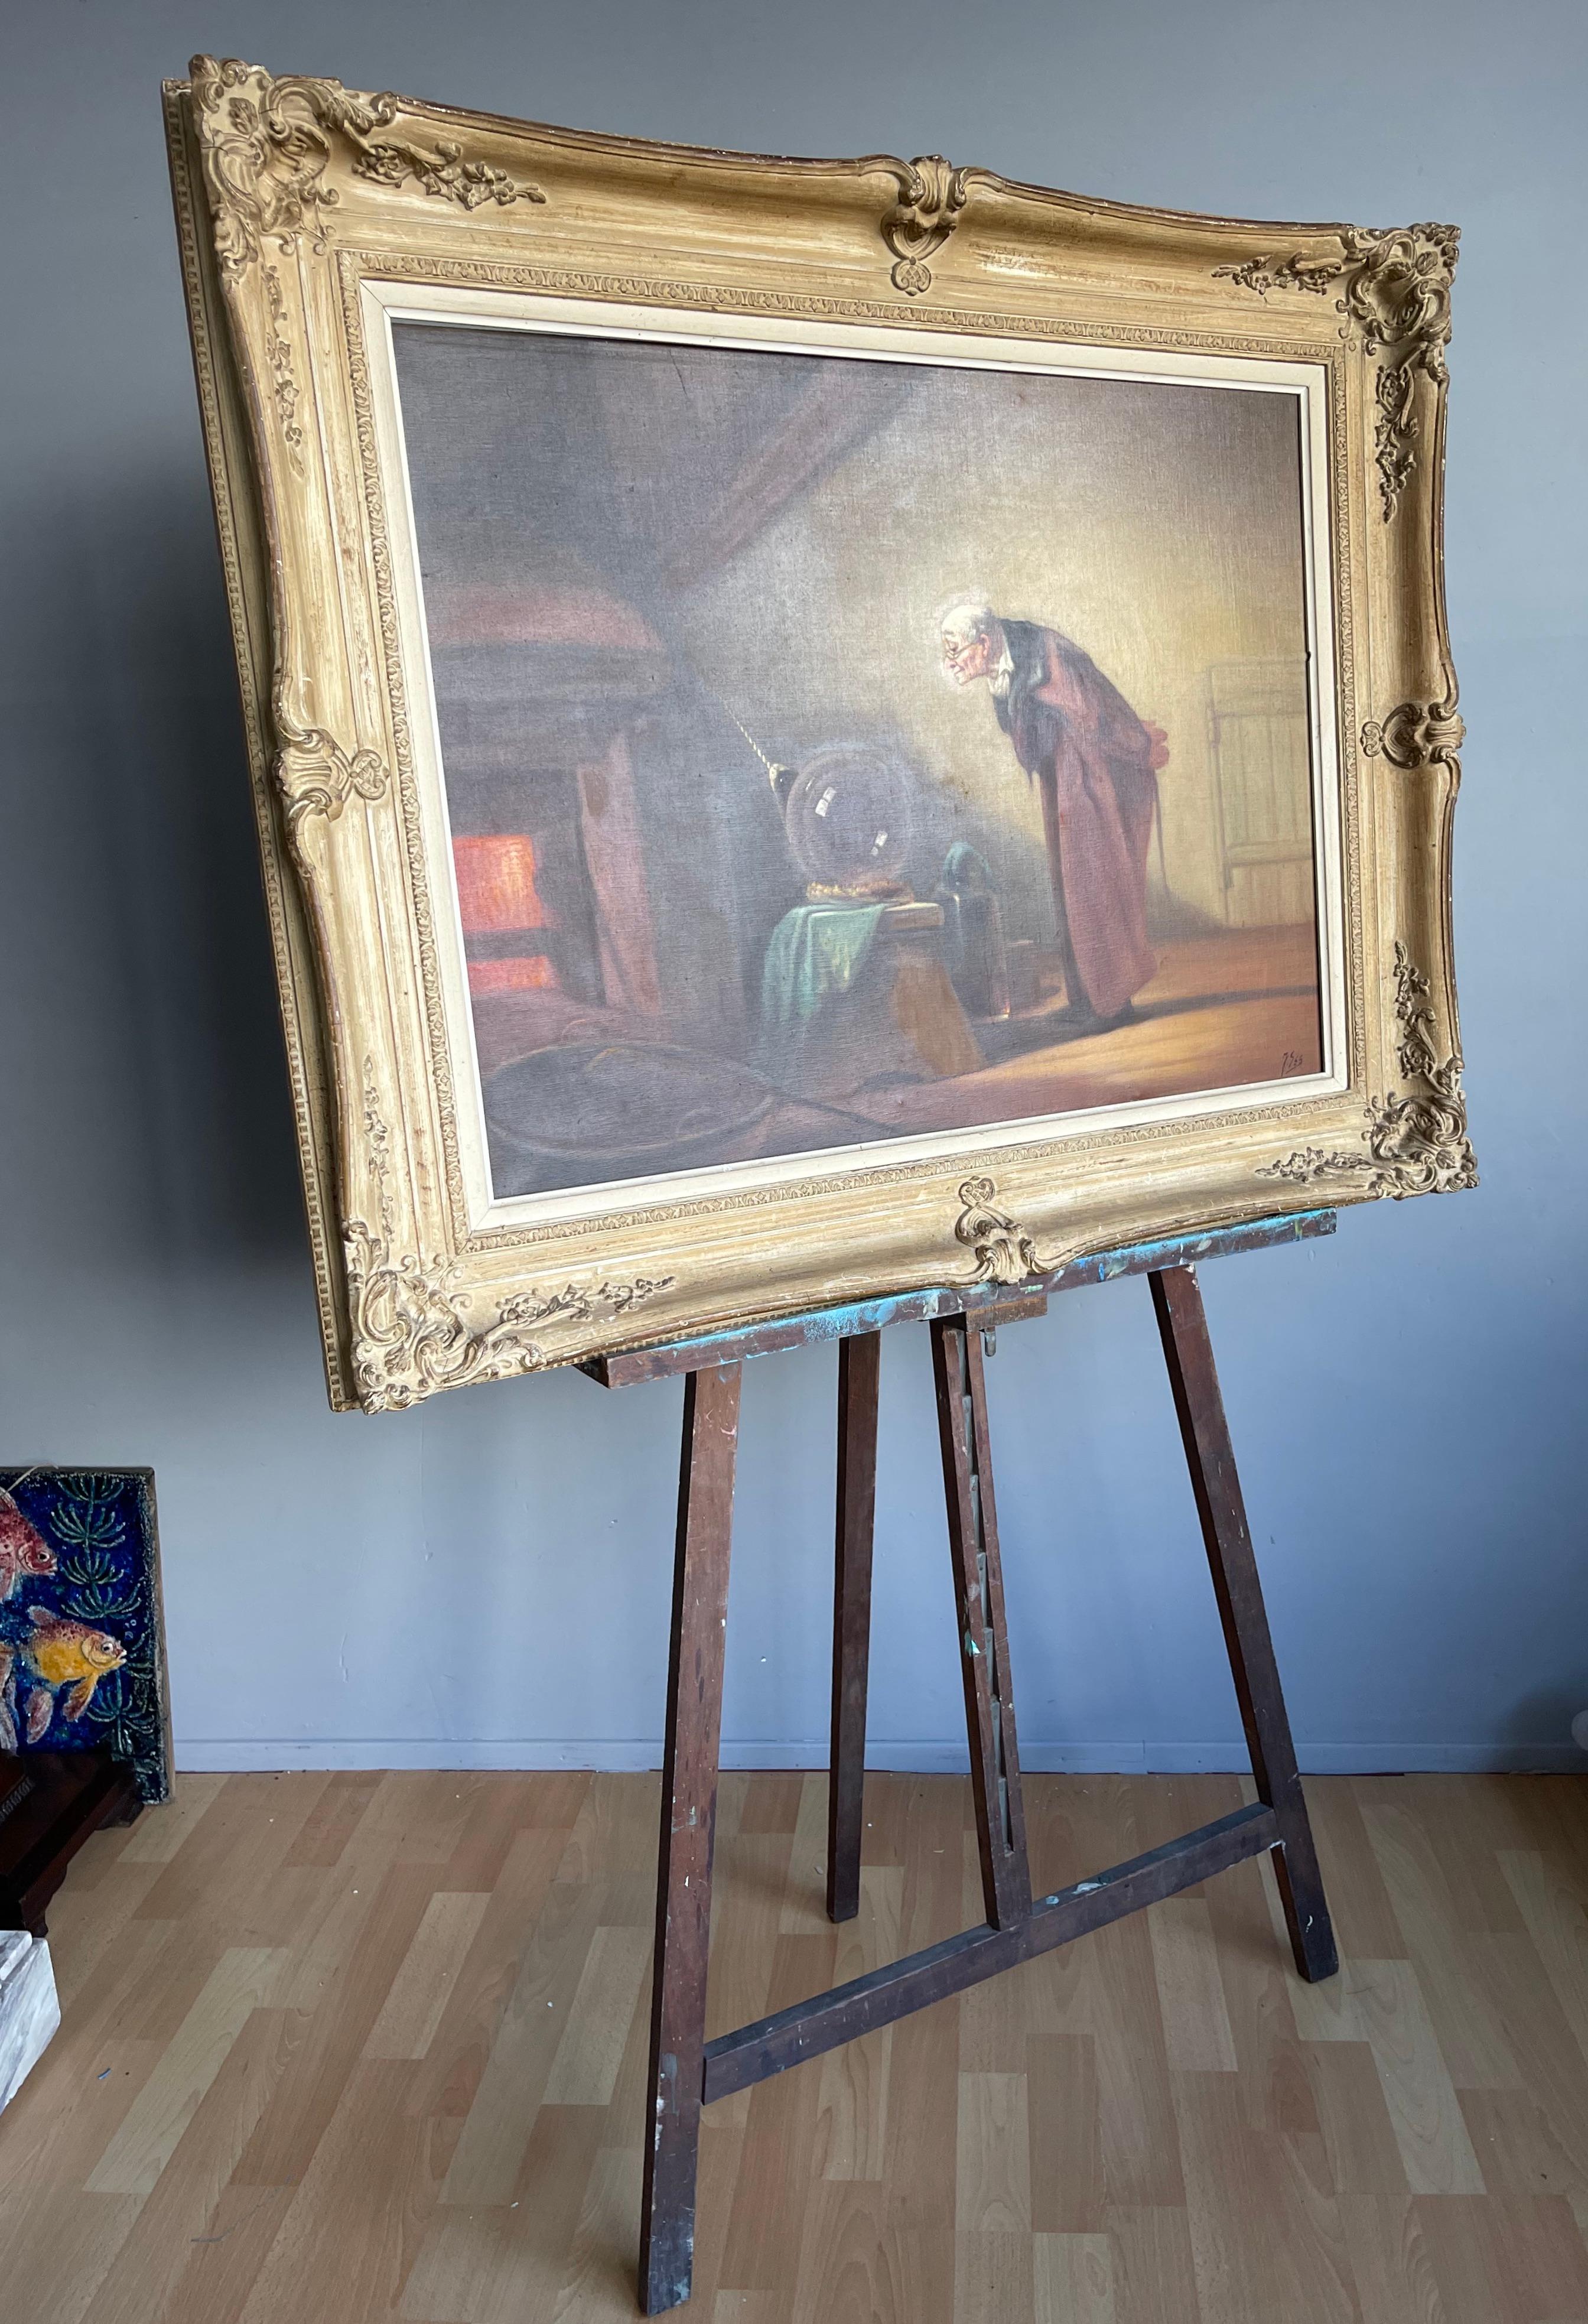 Excellent condition and ready to use easel for painting or displaying. 

This beautiful used easel is another one of our recent rare finds and it most certainly is a joy to own and look at. Thanks to the solid beechwood and the three legged base